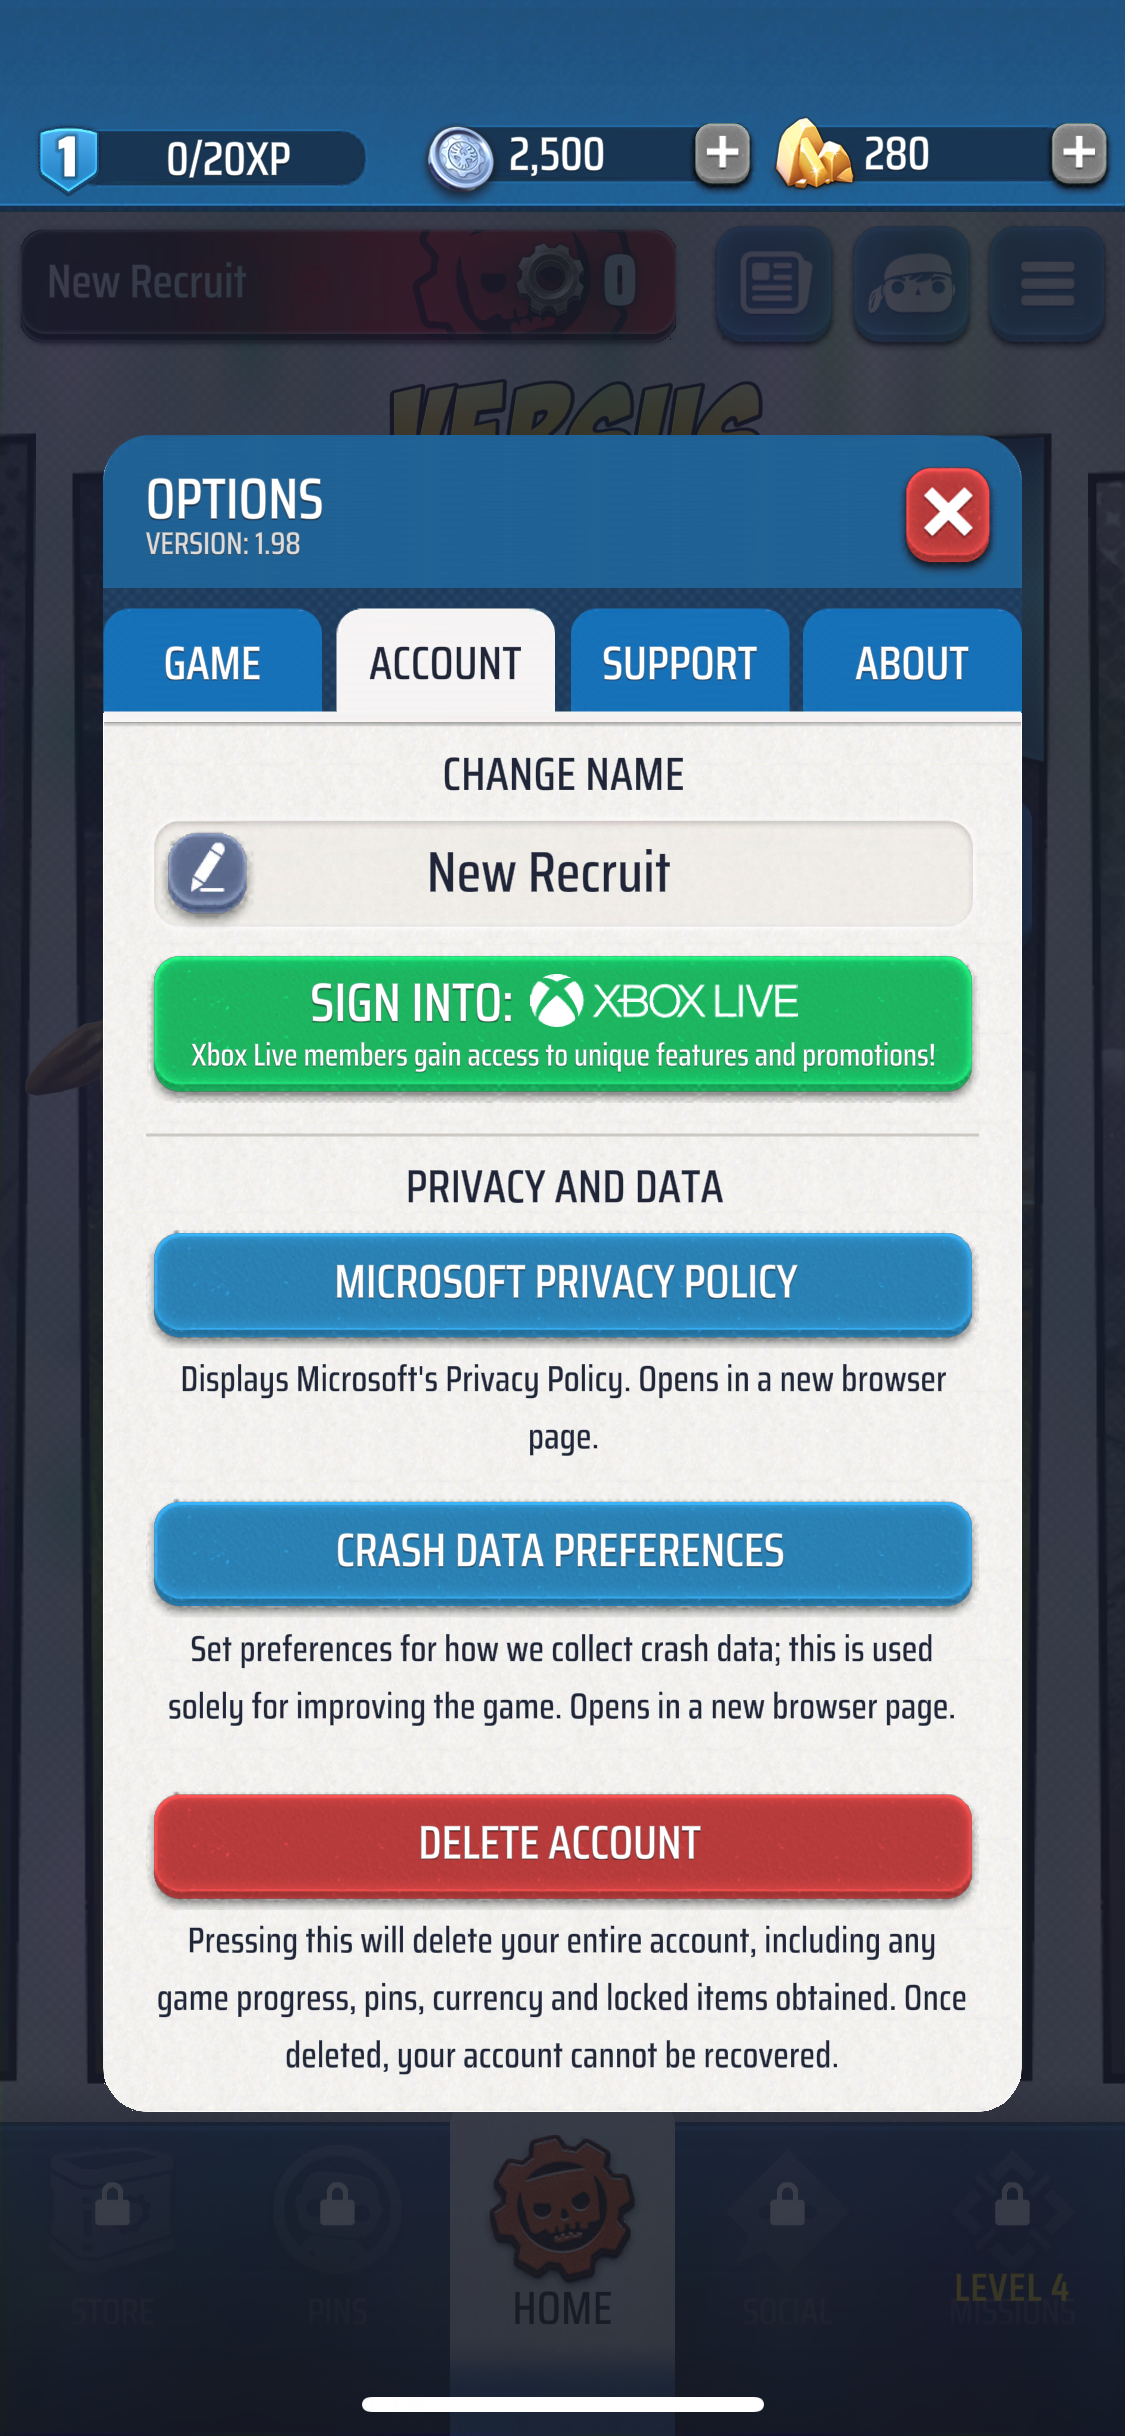 A screenshot from Gears POP!, displaying the "Account" tab in the "Options" menu.